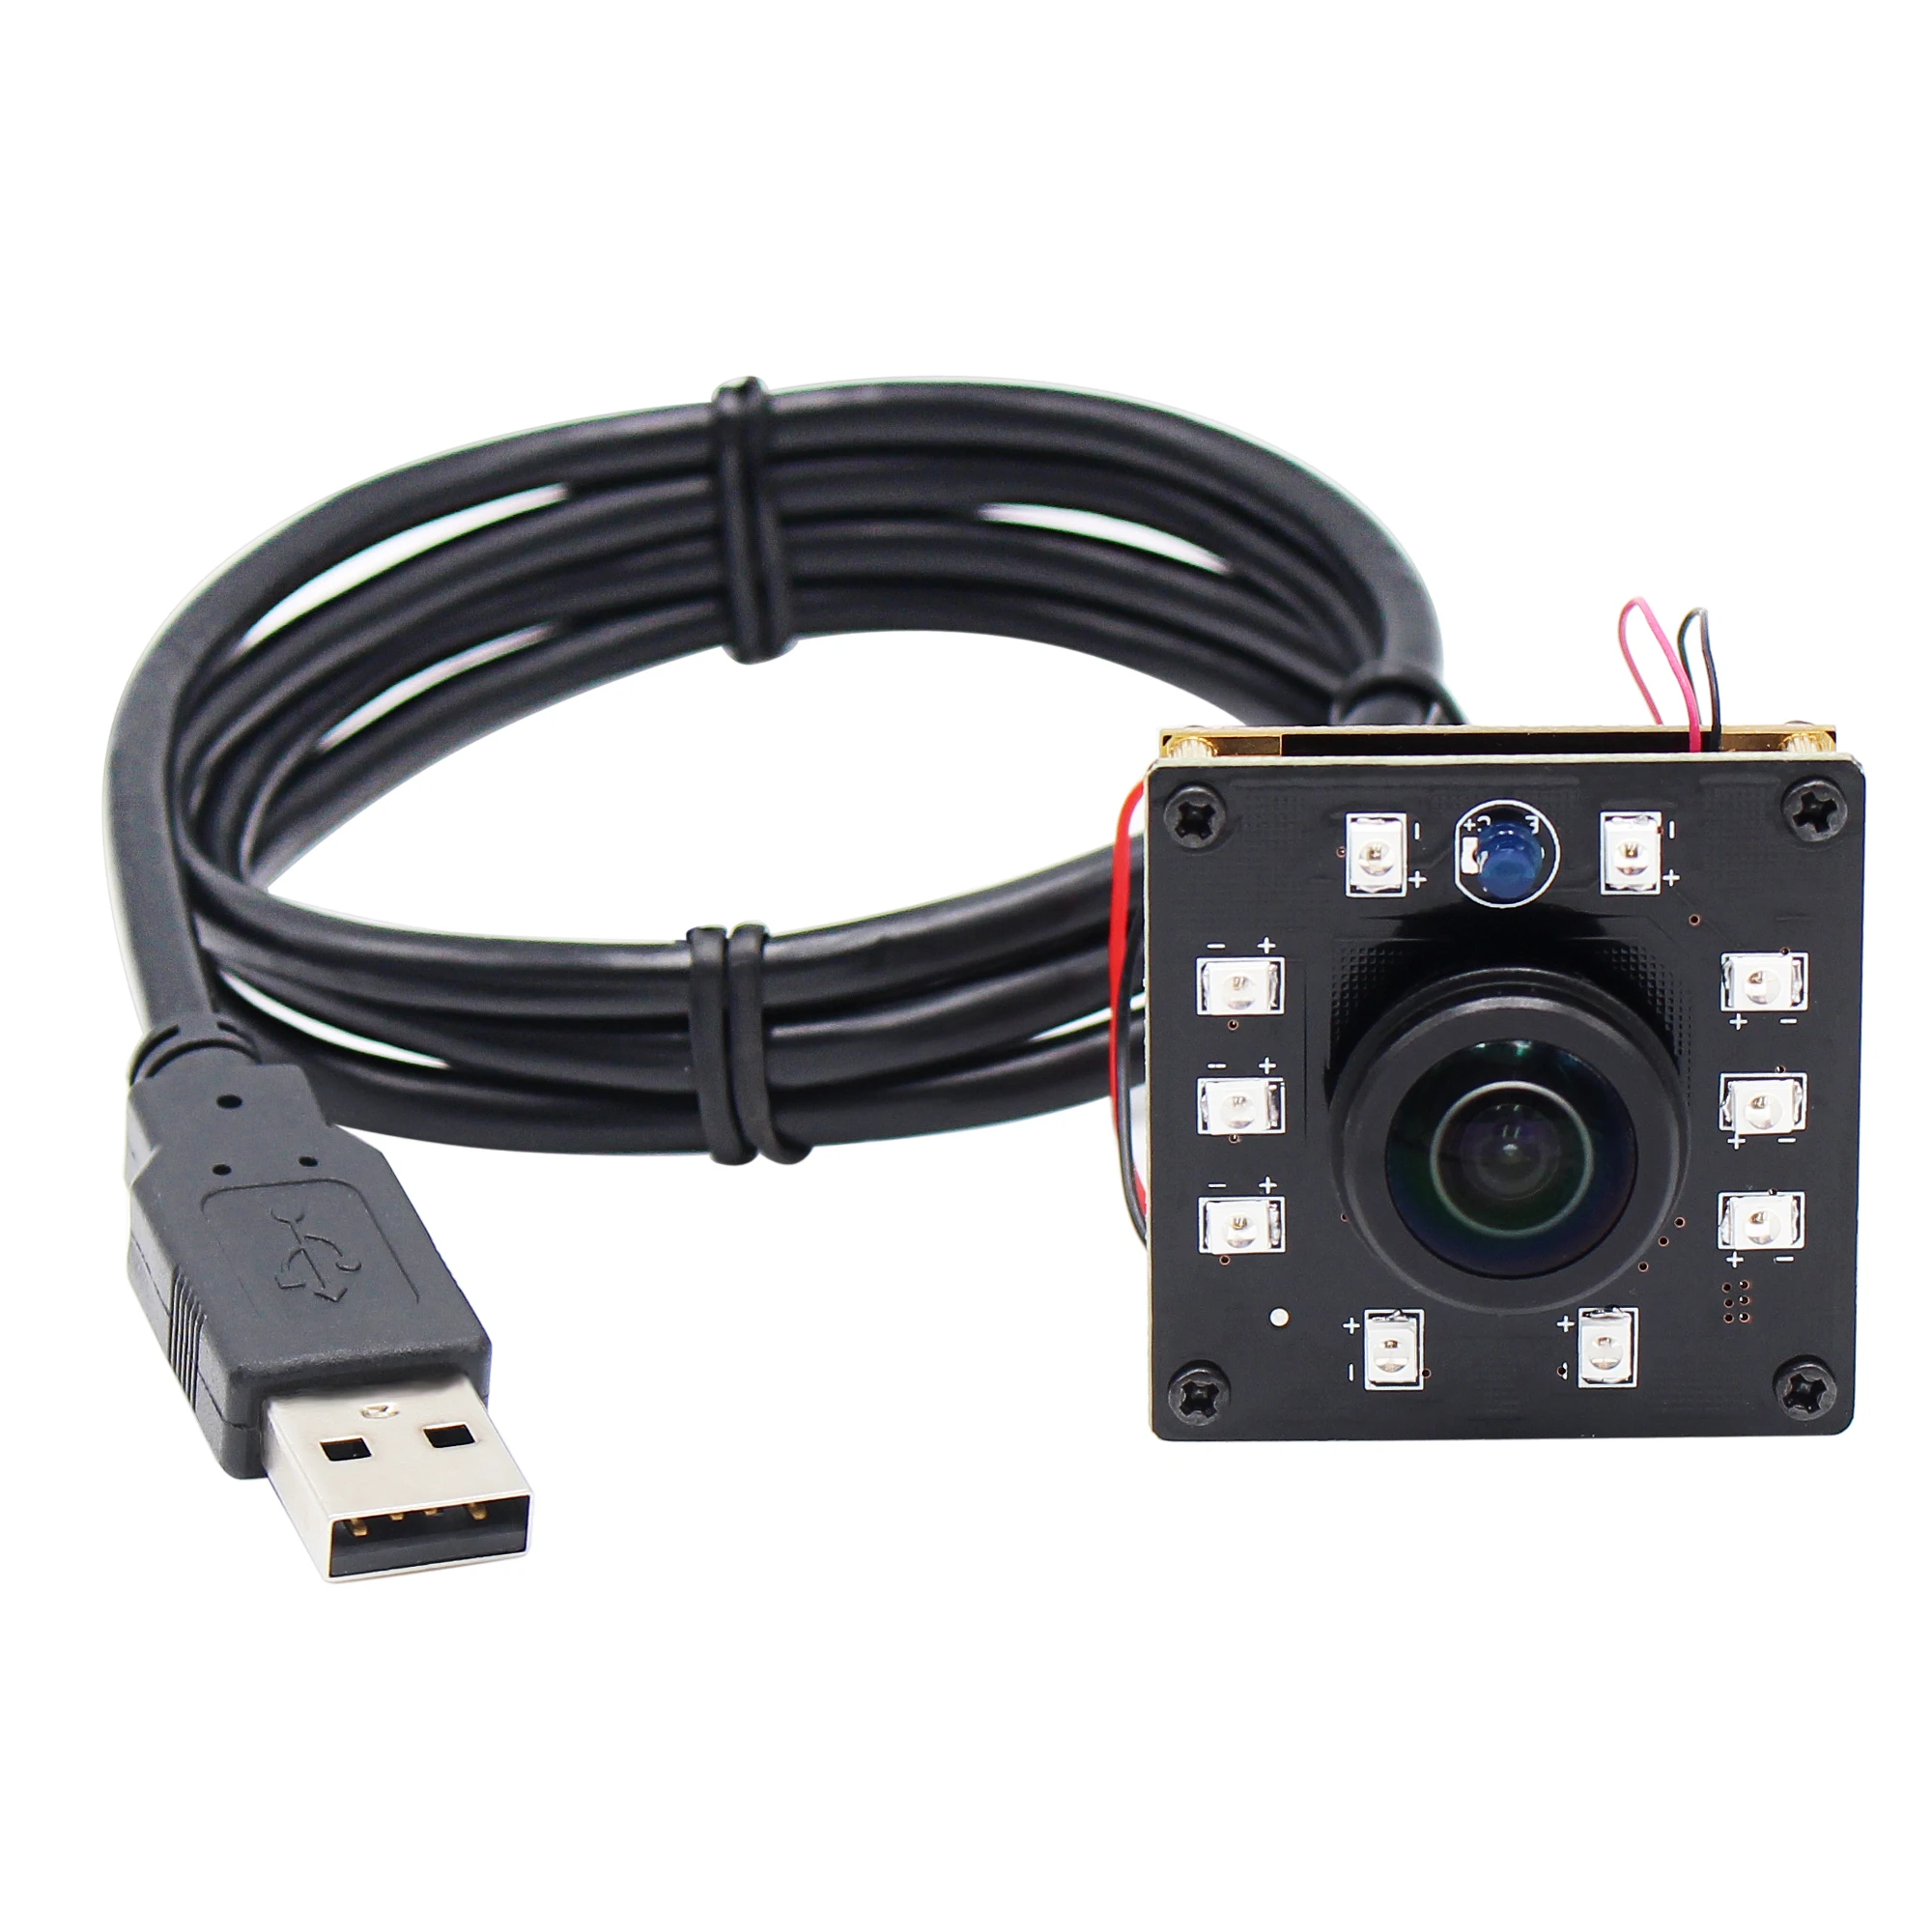 180degree Panoramic Wide Angle 1080P IMX323 Industrial Machine Vision Low light  webcam IR Infrared USB Web Camera Module images - 6